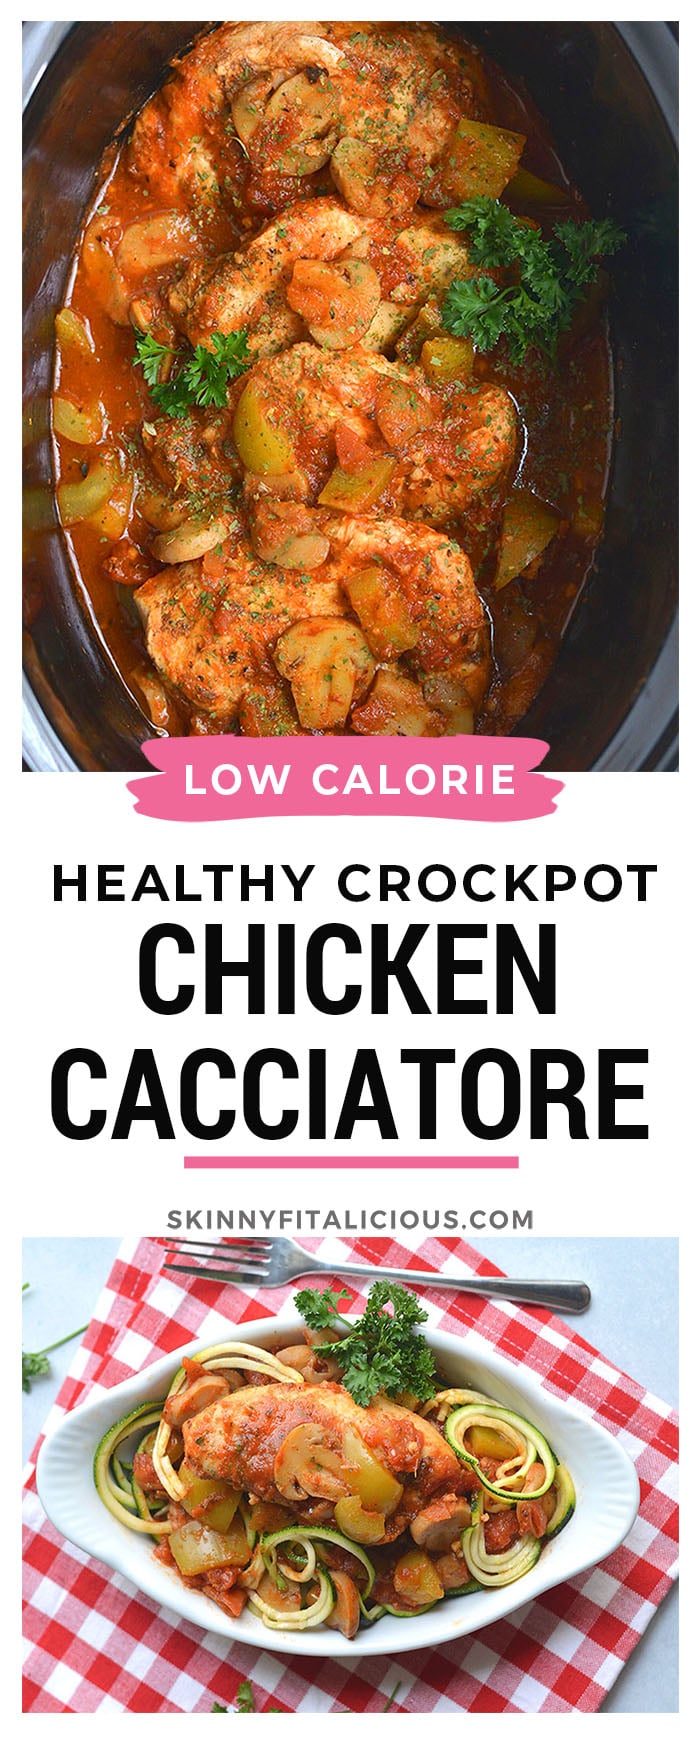 Crockpot Chicken Cacciatore! A healthy spin on traditional Italian cacciatore made in a slow cooker. Served over zucchini noodles for a minimal effort, lower carb dinner that’s big on flavor. 